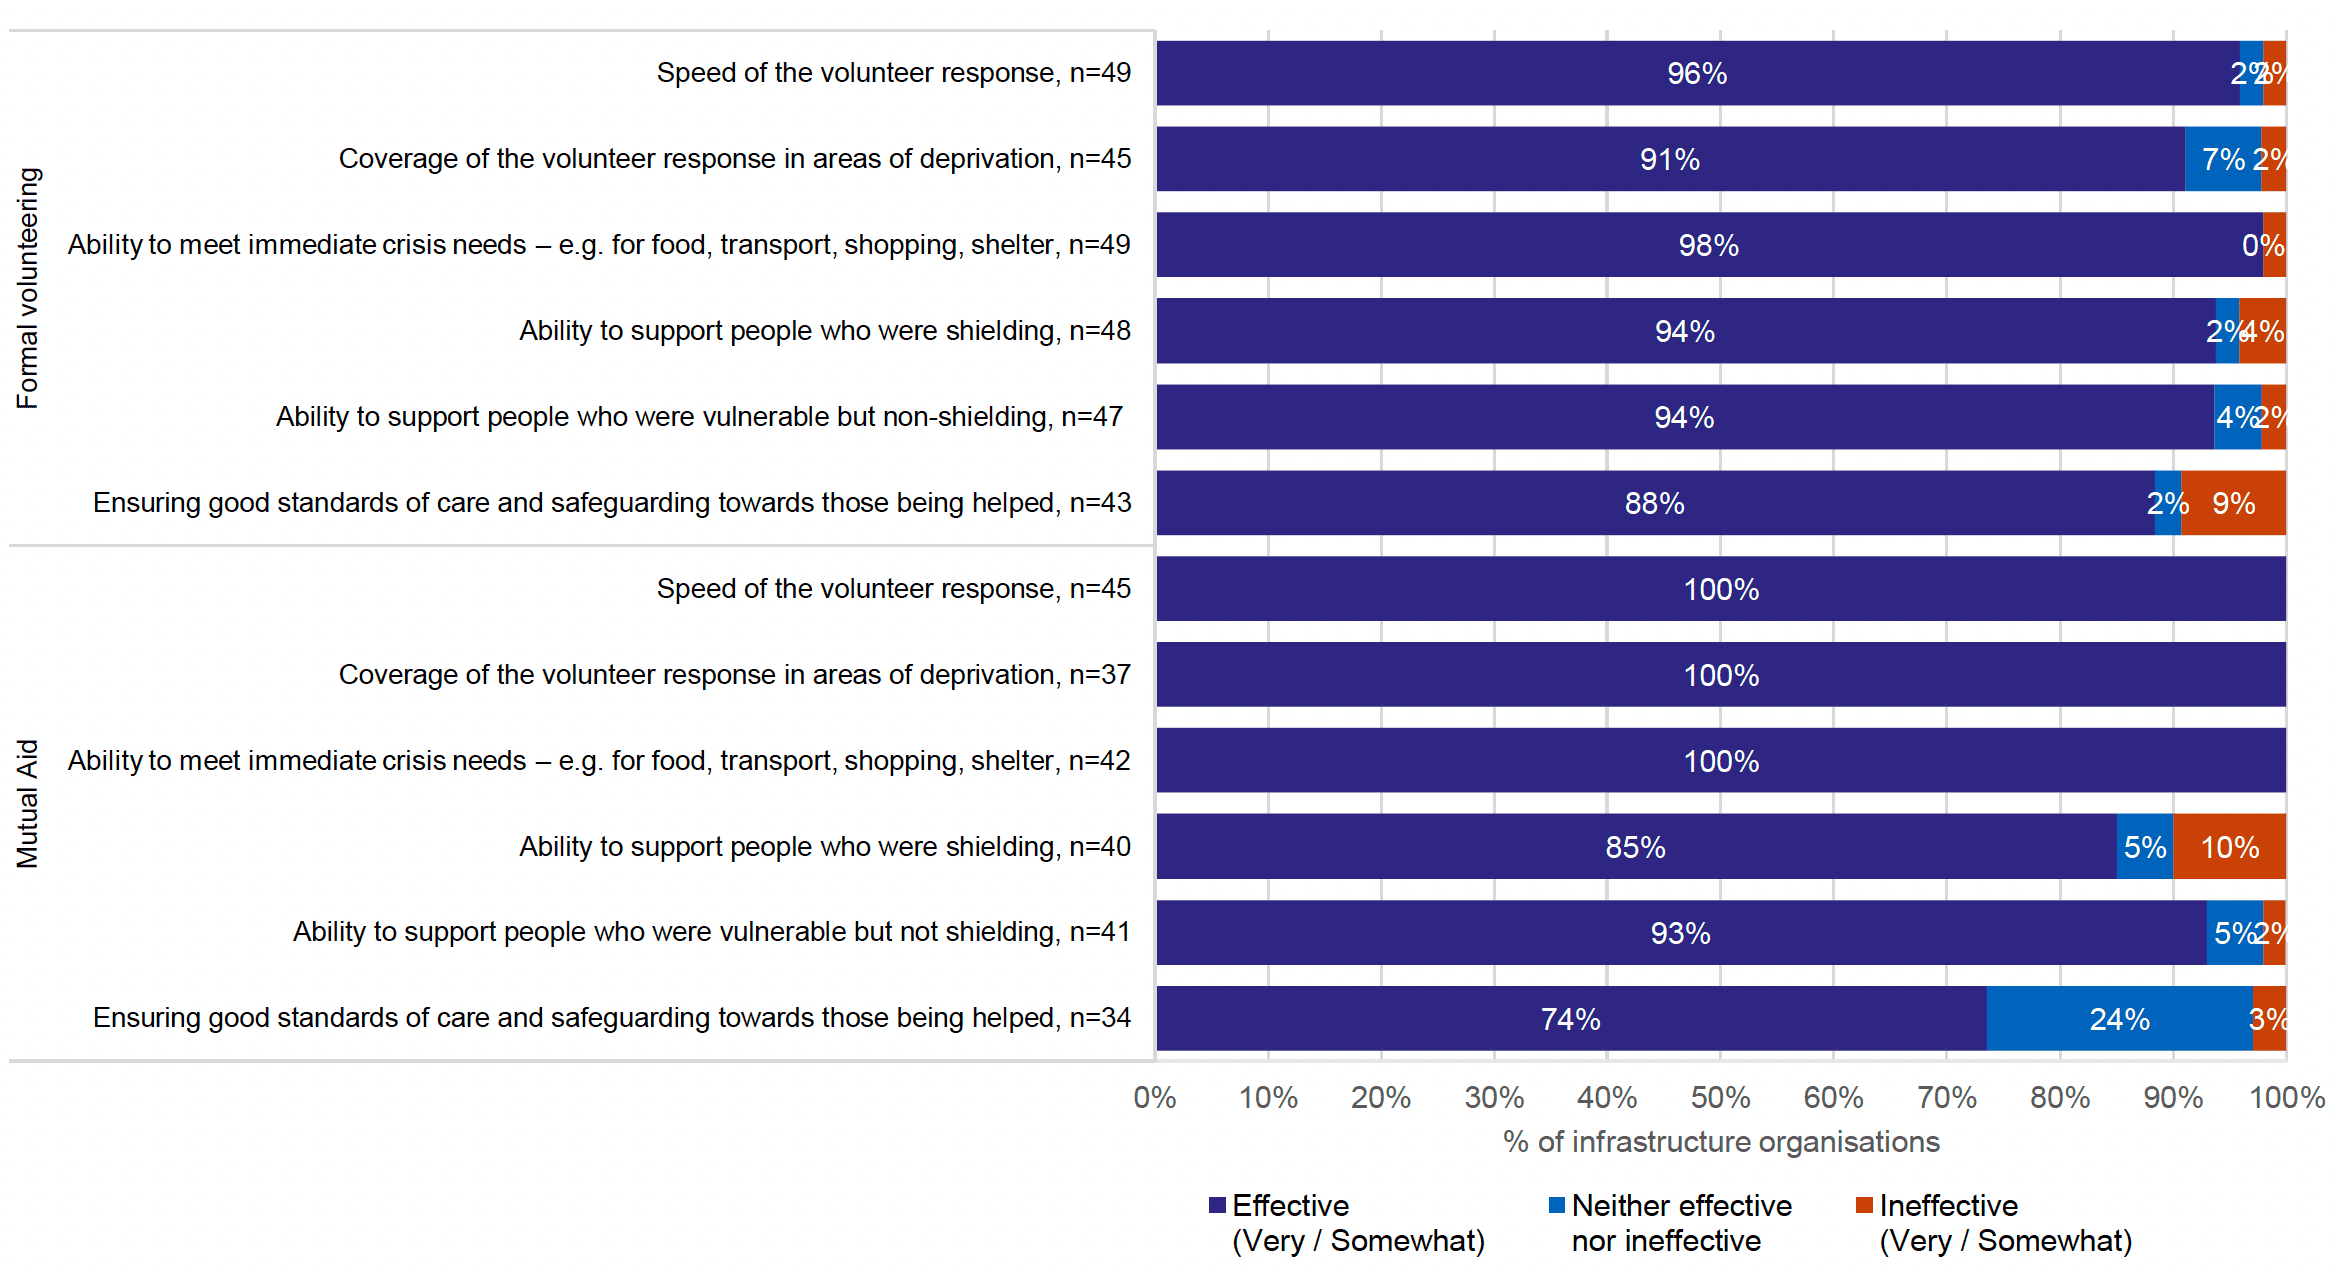 Chart showing infrastructure organisation views on the effectiveness of formal and mutual aid volunteering in the first lockdown (Mar-Jun 2020), excluding ‘don’t know’ responses